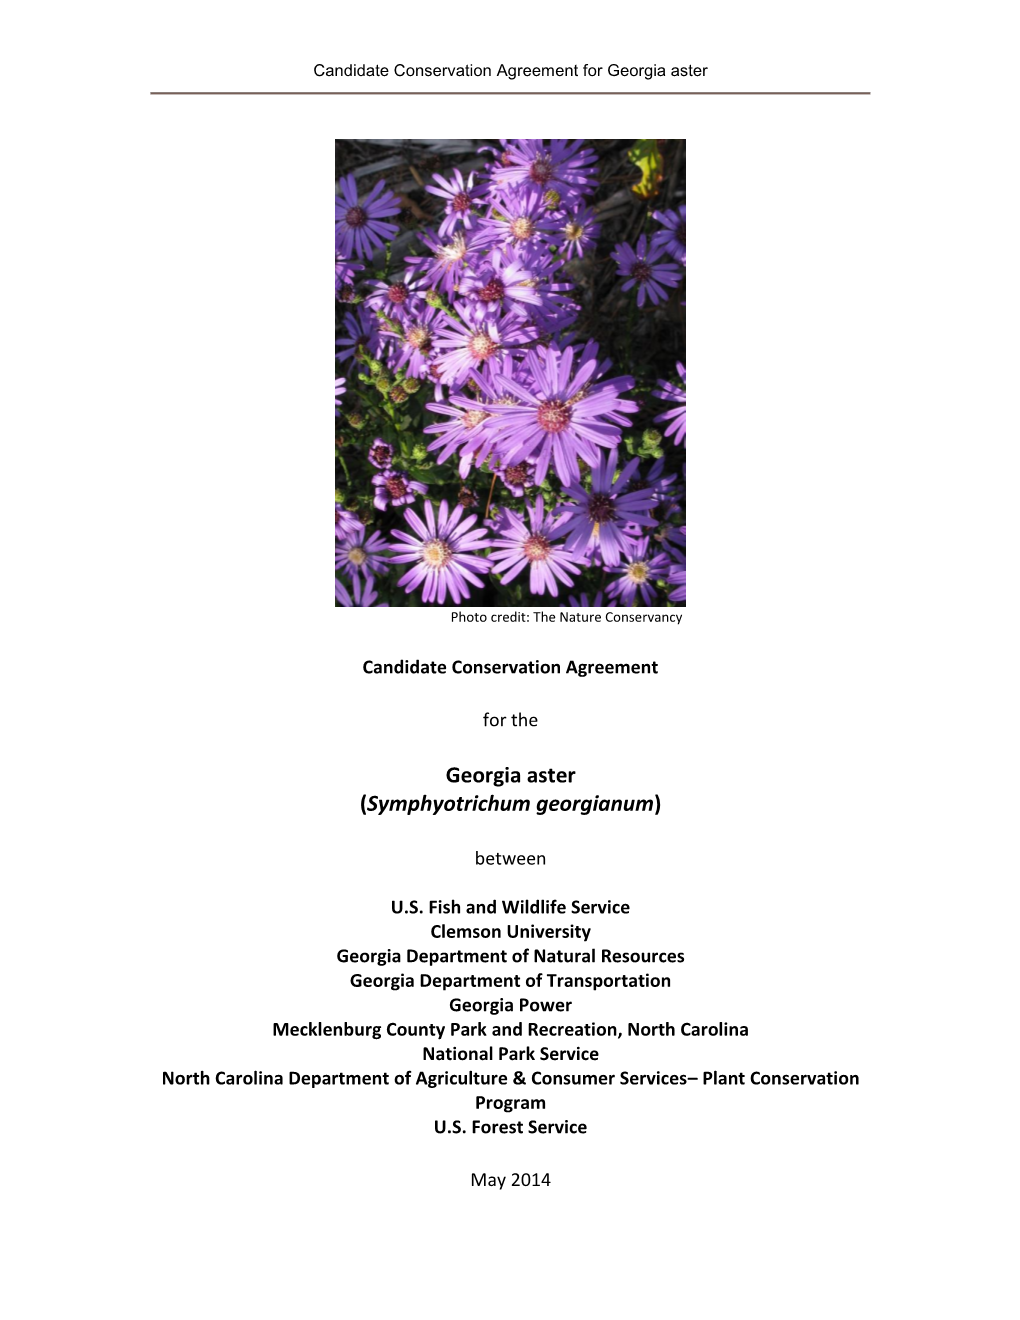 Candidate Conservation Agreement for Georgia Aster